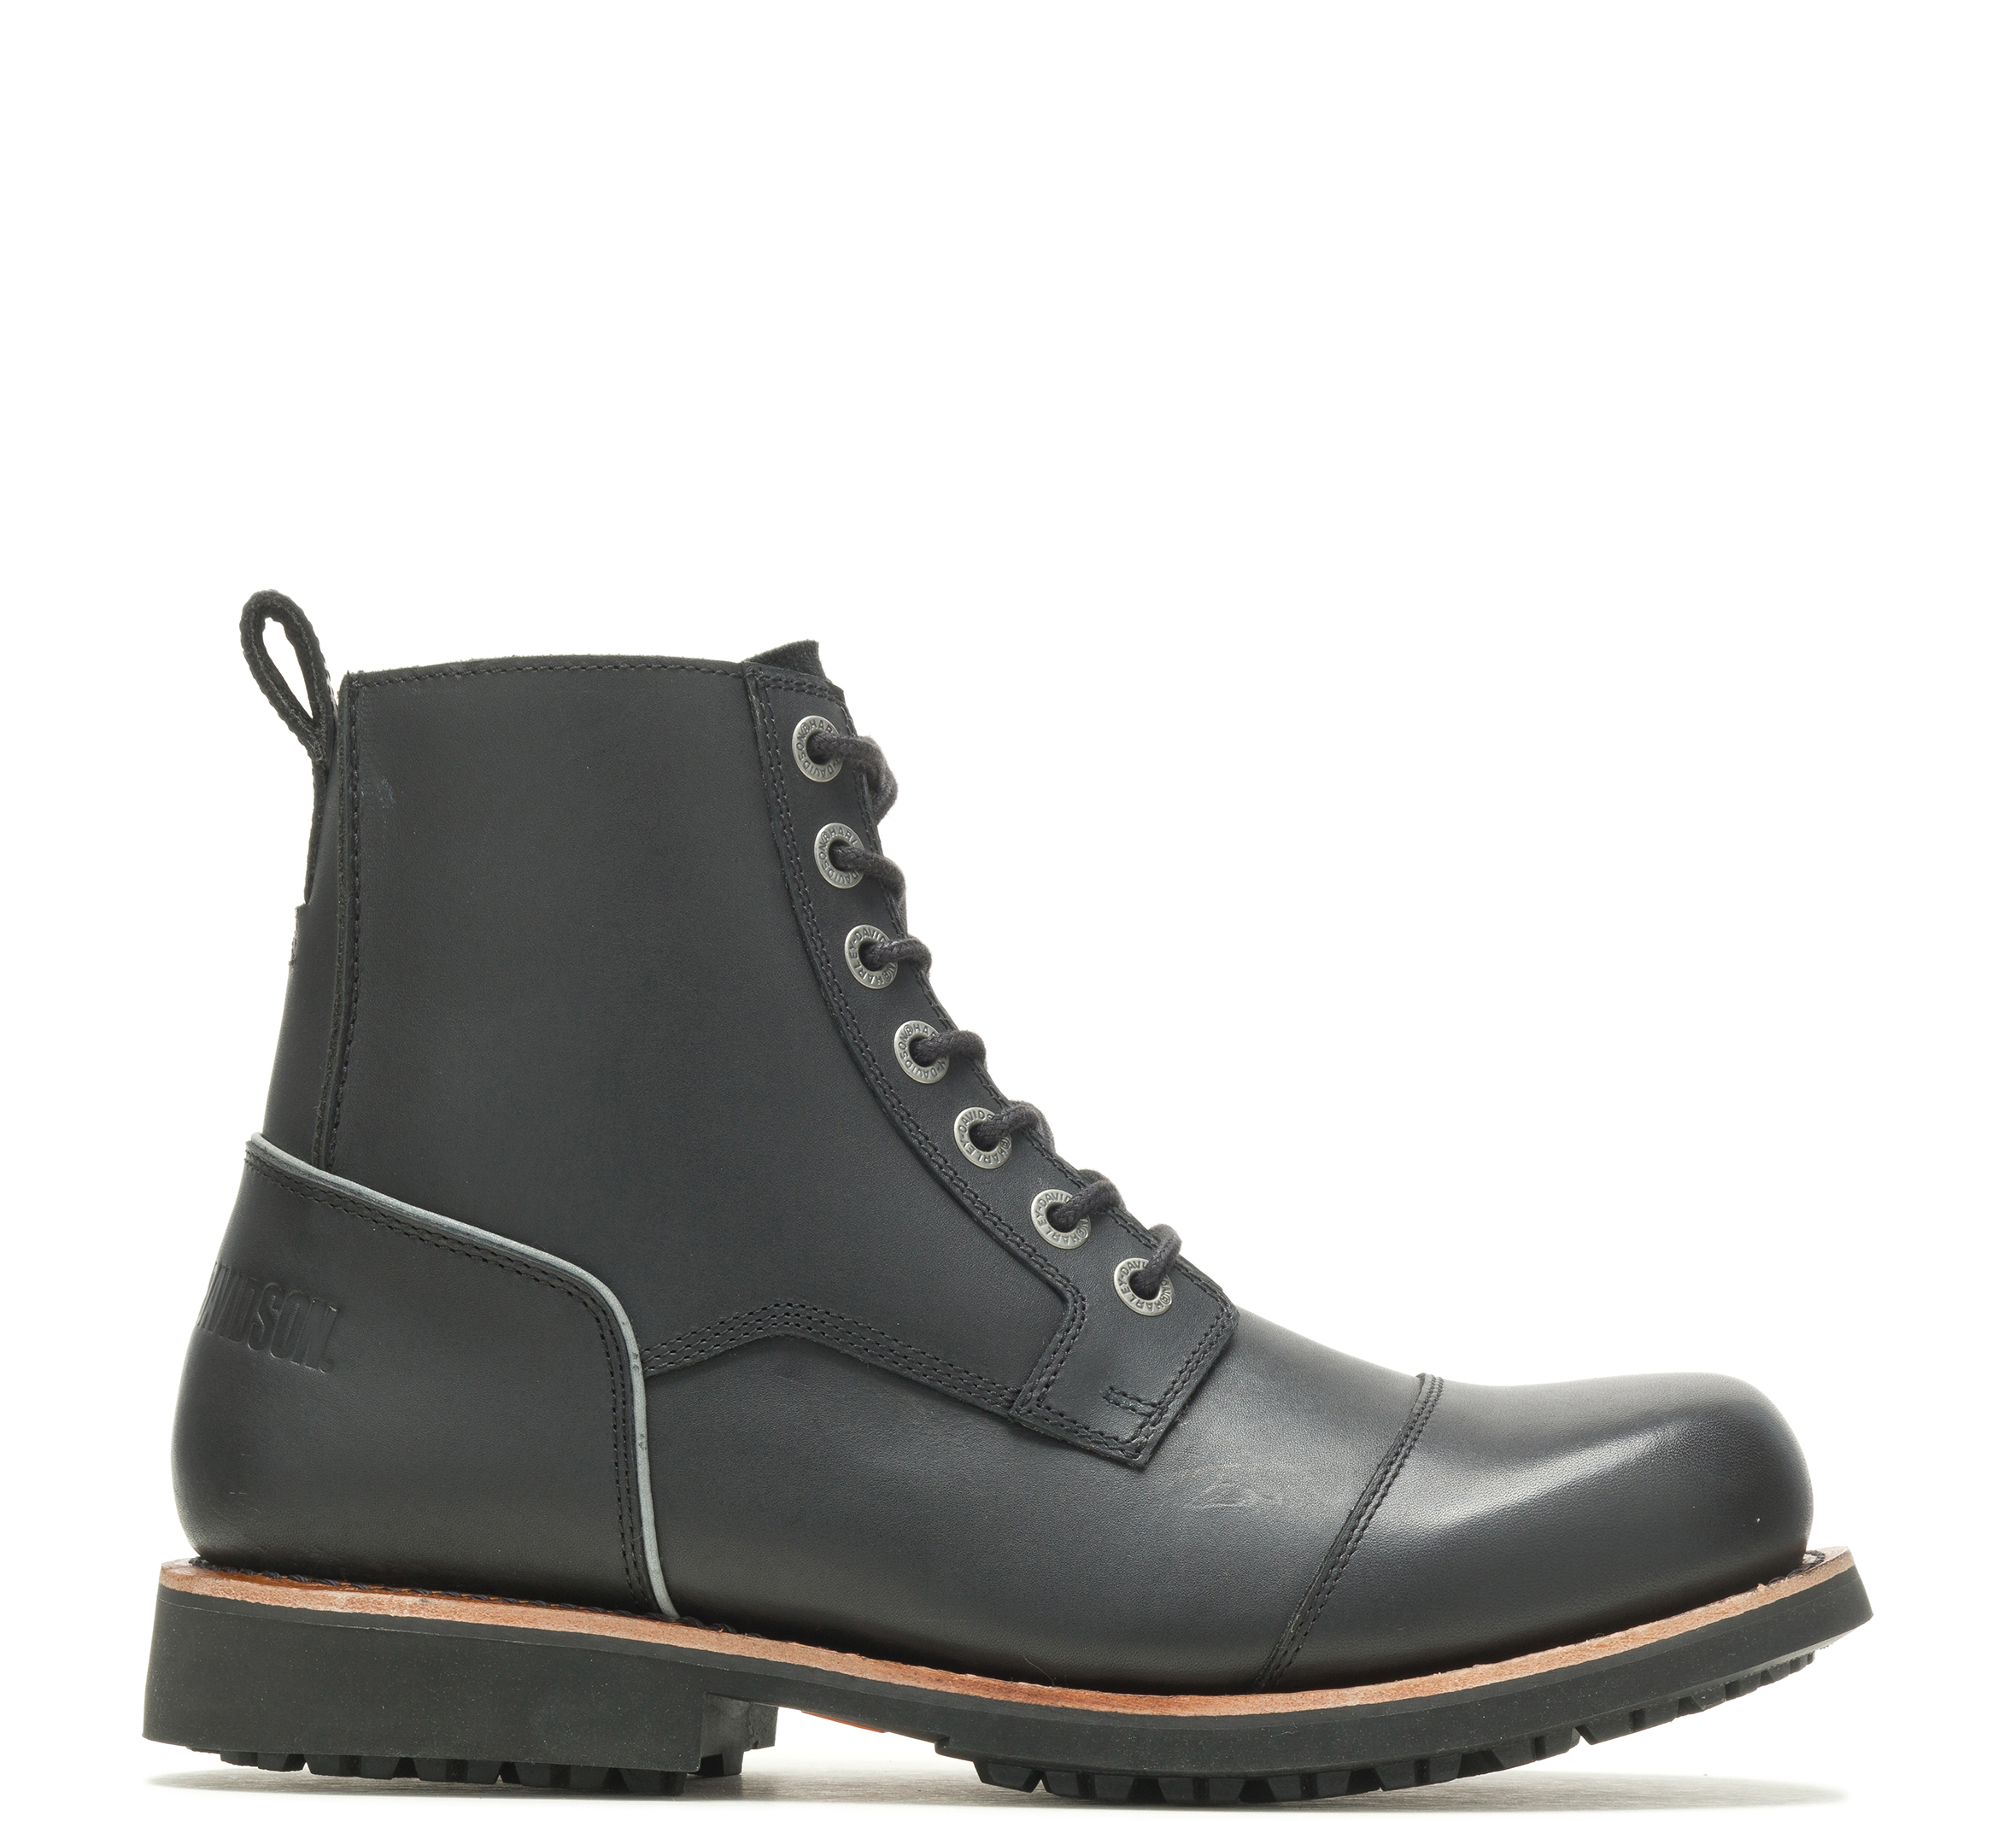 Pablo Red Bottom Square Toe Men's Boots